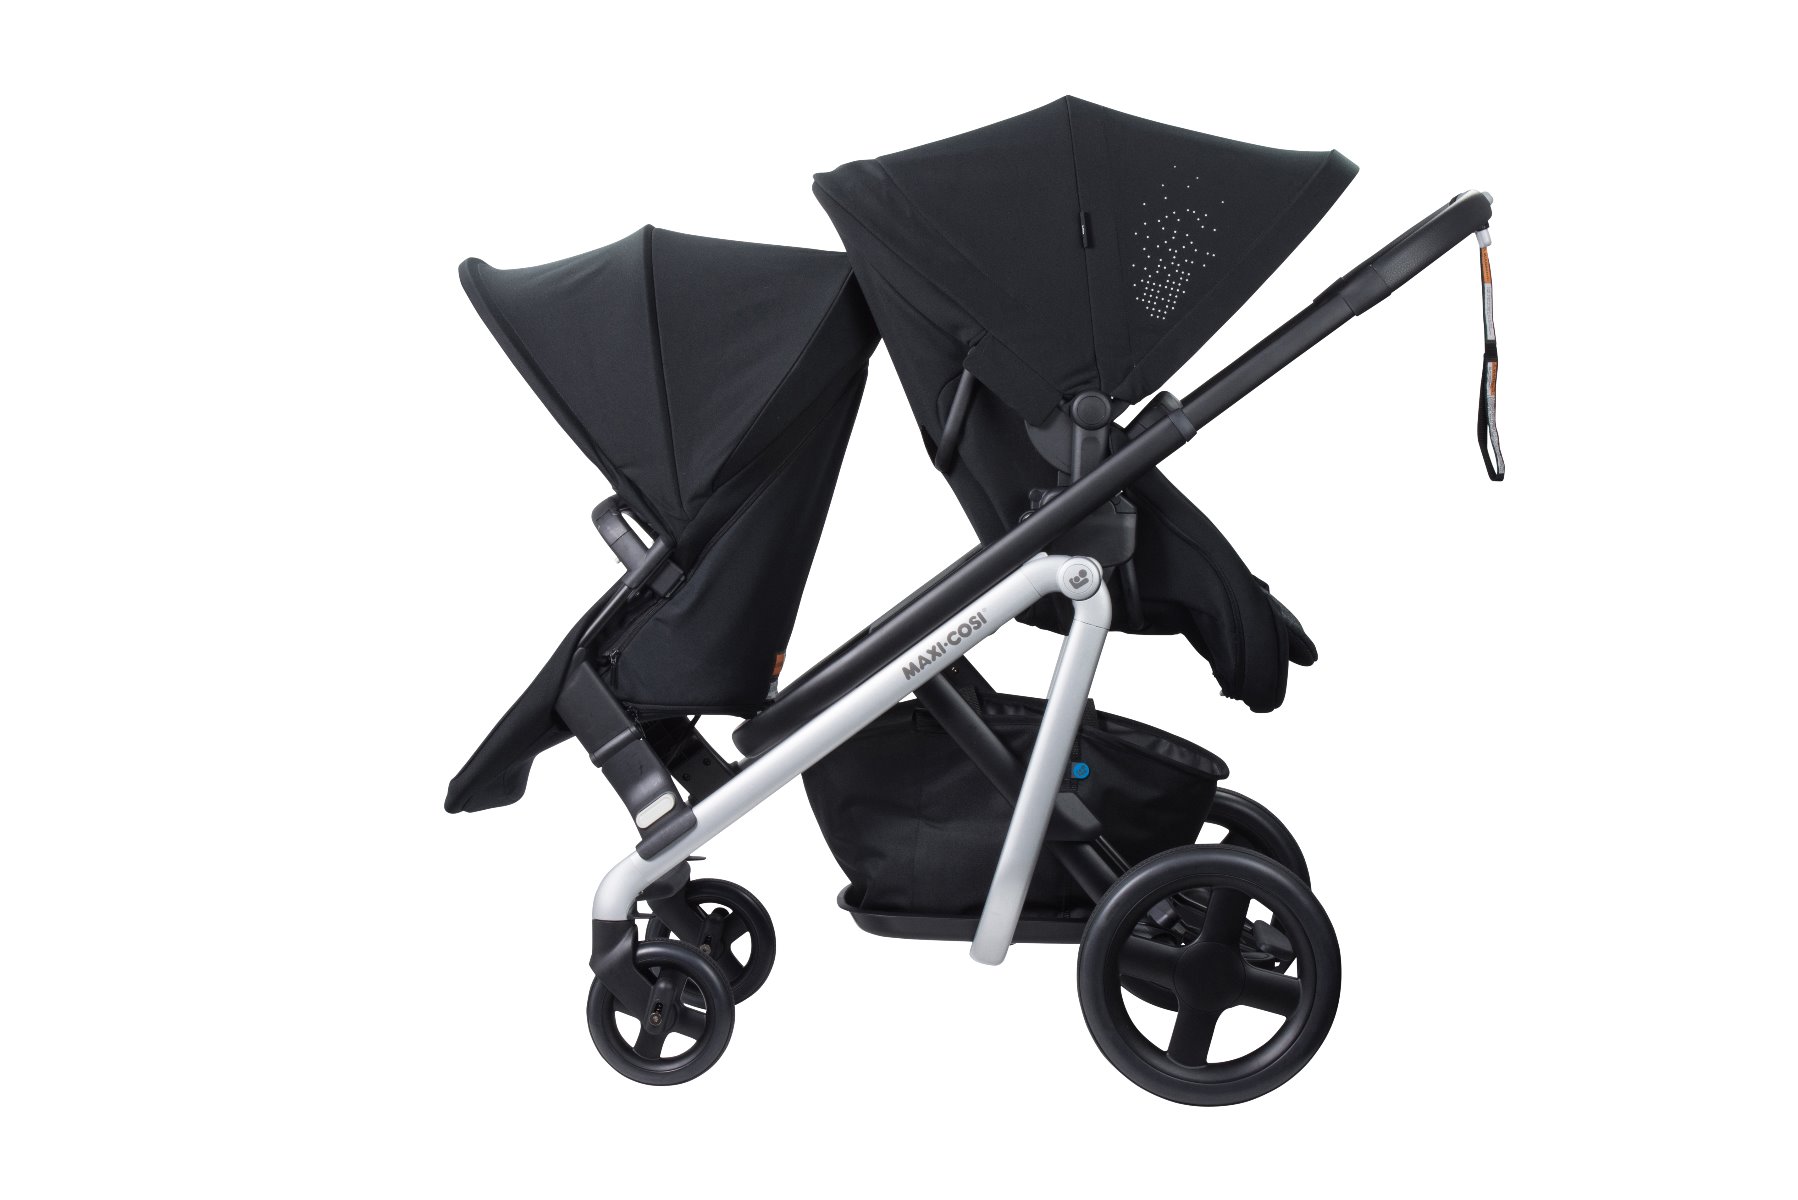 Maxi-cosi Lila Stroller transforms into a Duo Stroller to transport two children at once.